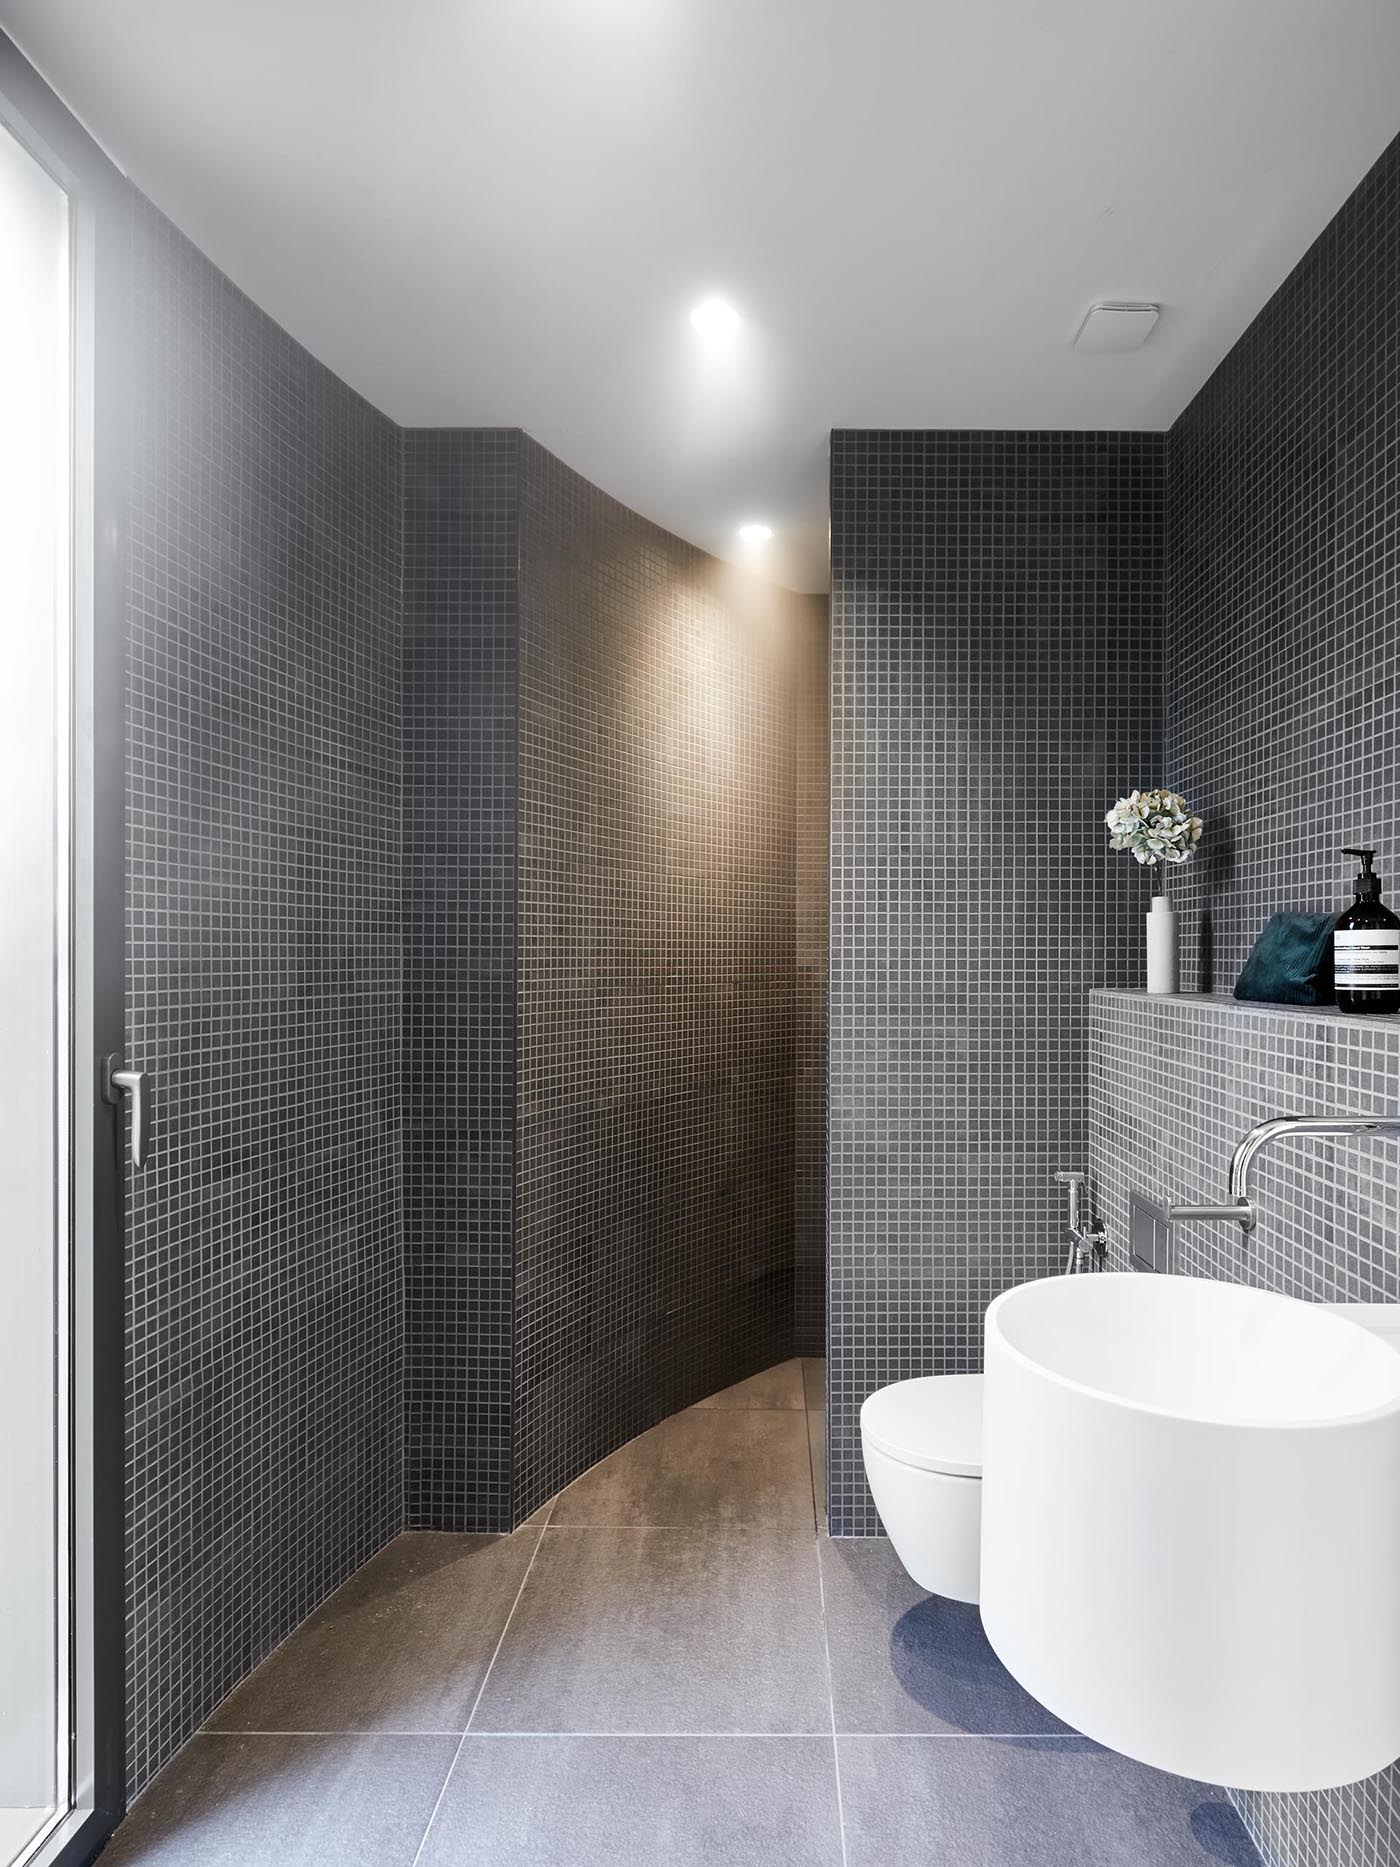 A modern bathroom with walls covered in small square grey tiles.